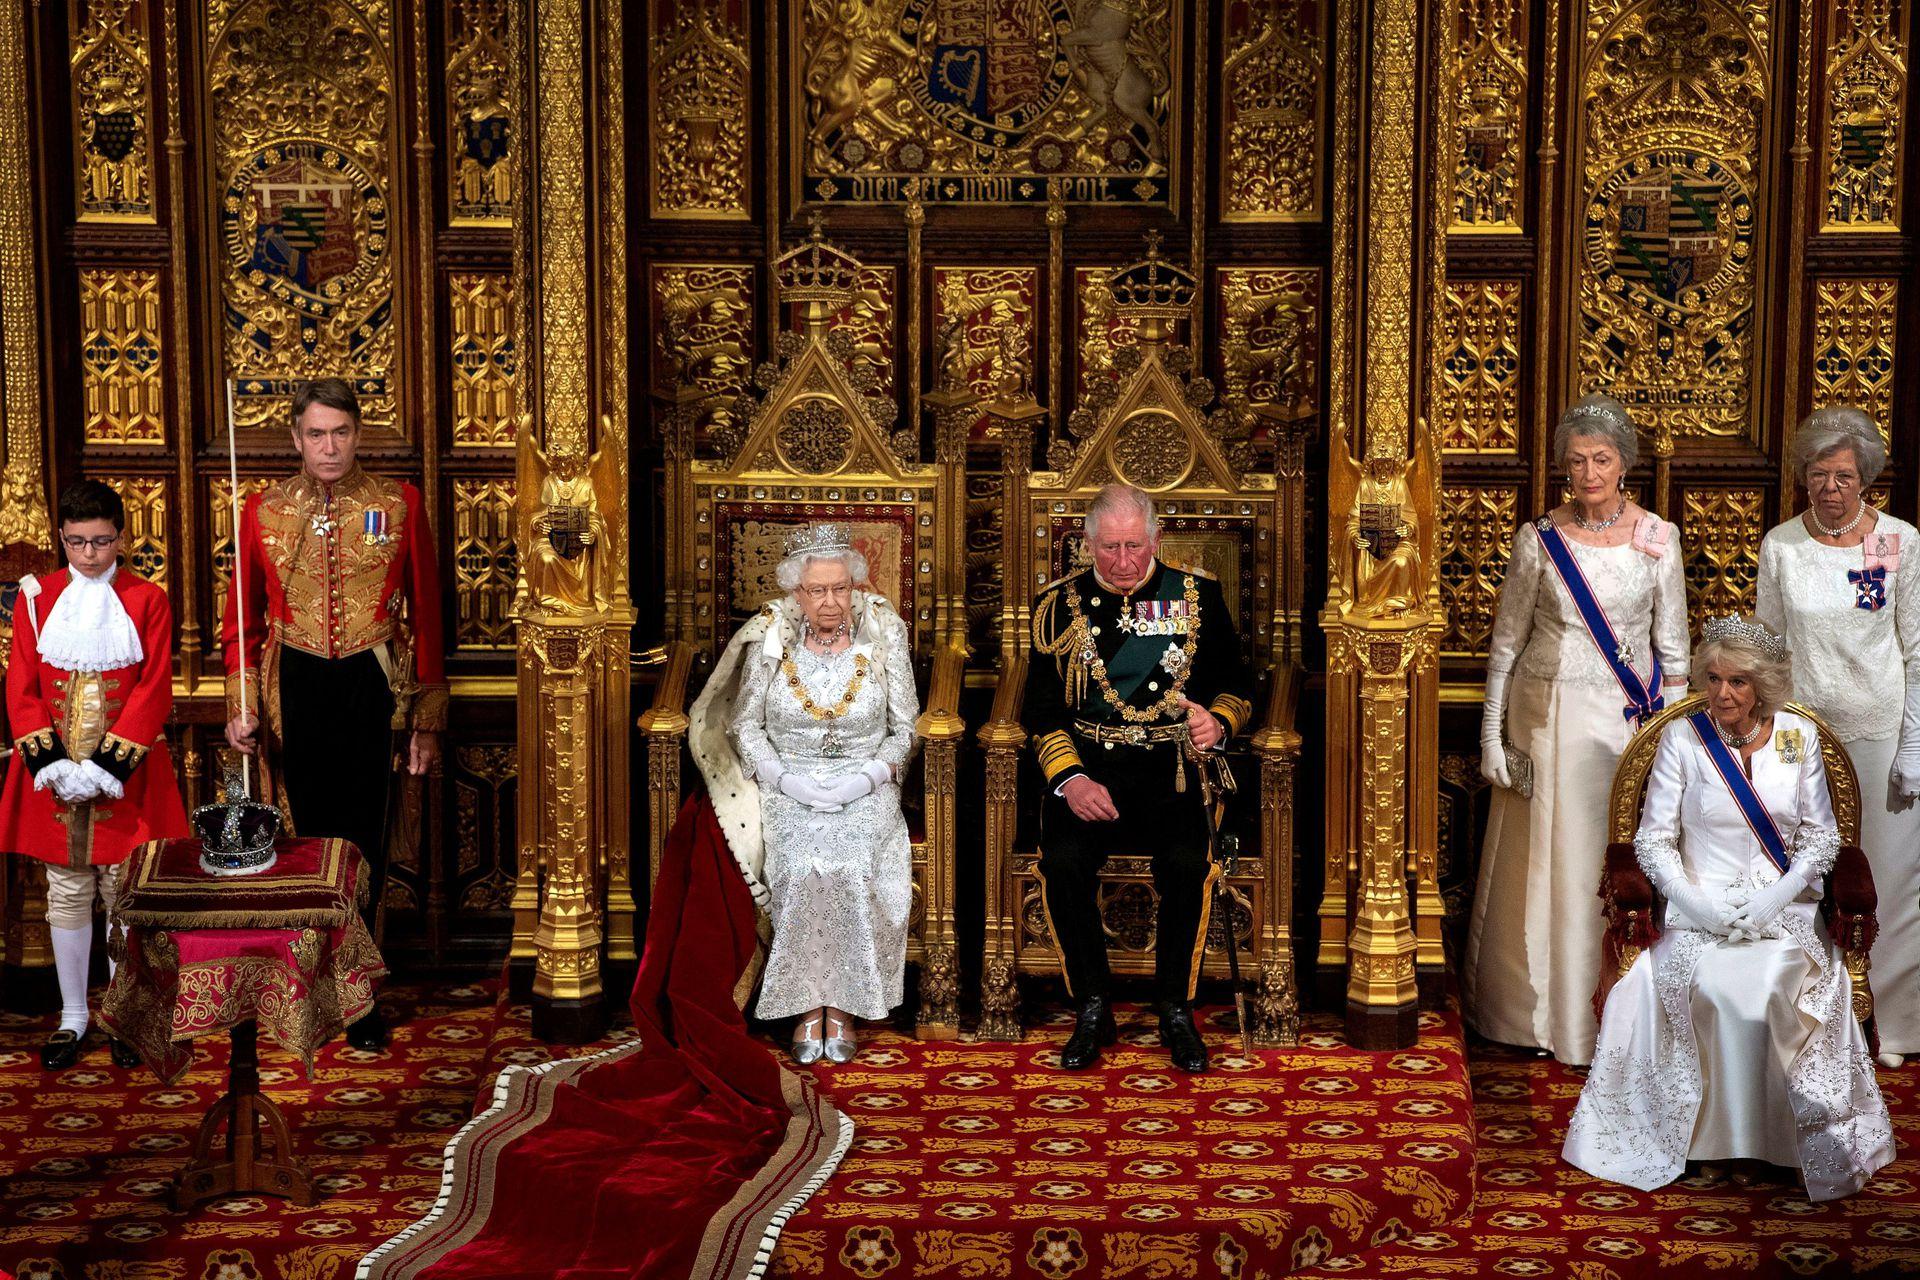 Britain's Queen Elizabeth, Charles, the Prince of Wales and Camilla, Duchess of Cornwall are seen during the State Opening of Parliament in the House of Lords at the Palace of Westminster in London, Britain October 14, 2019. - Avaz